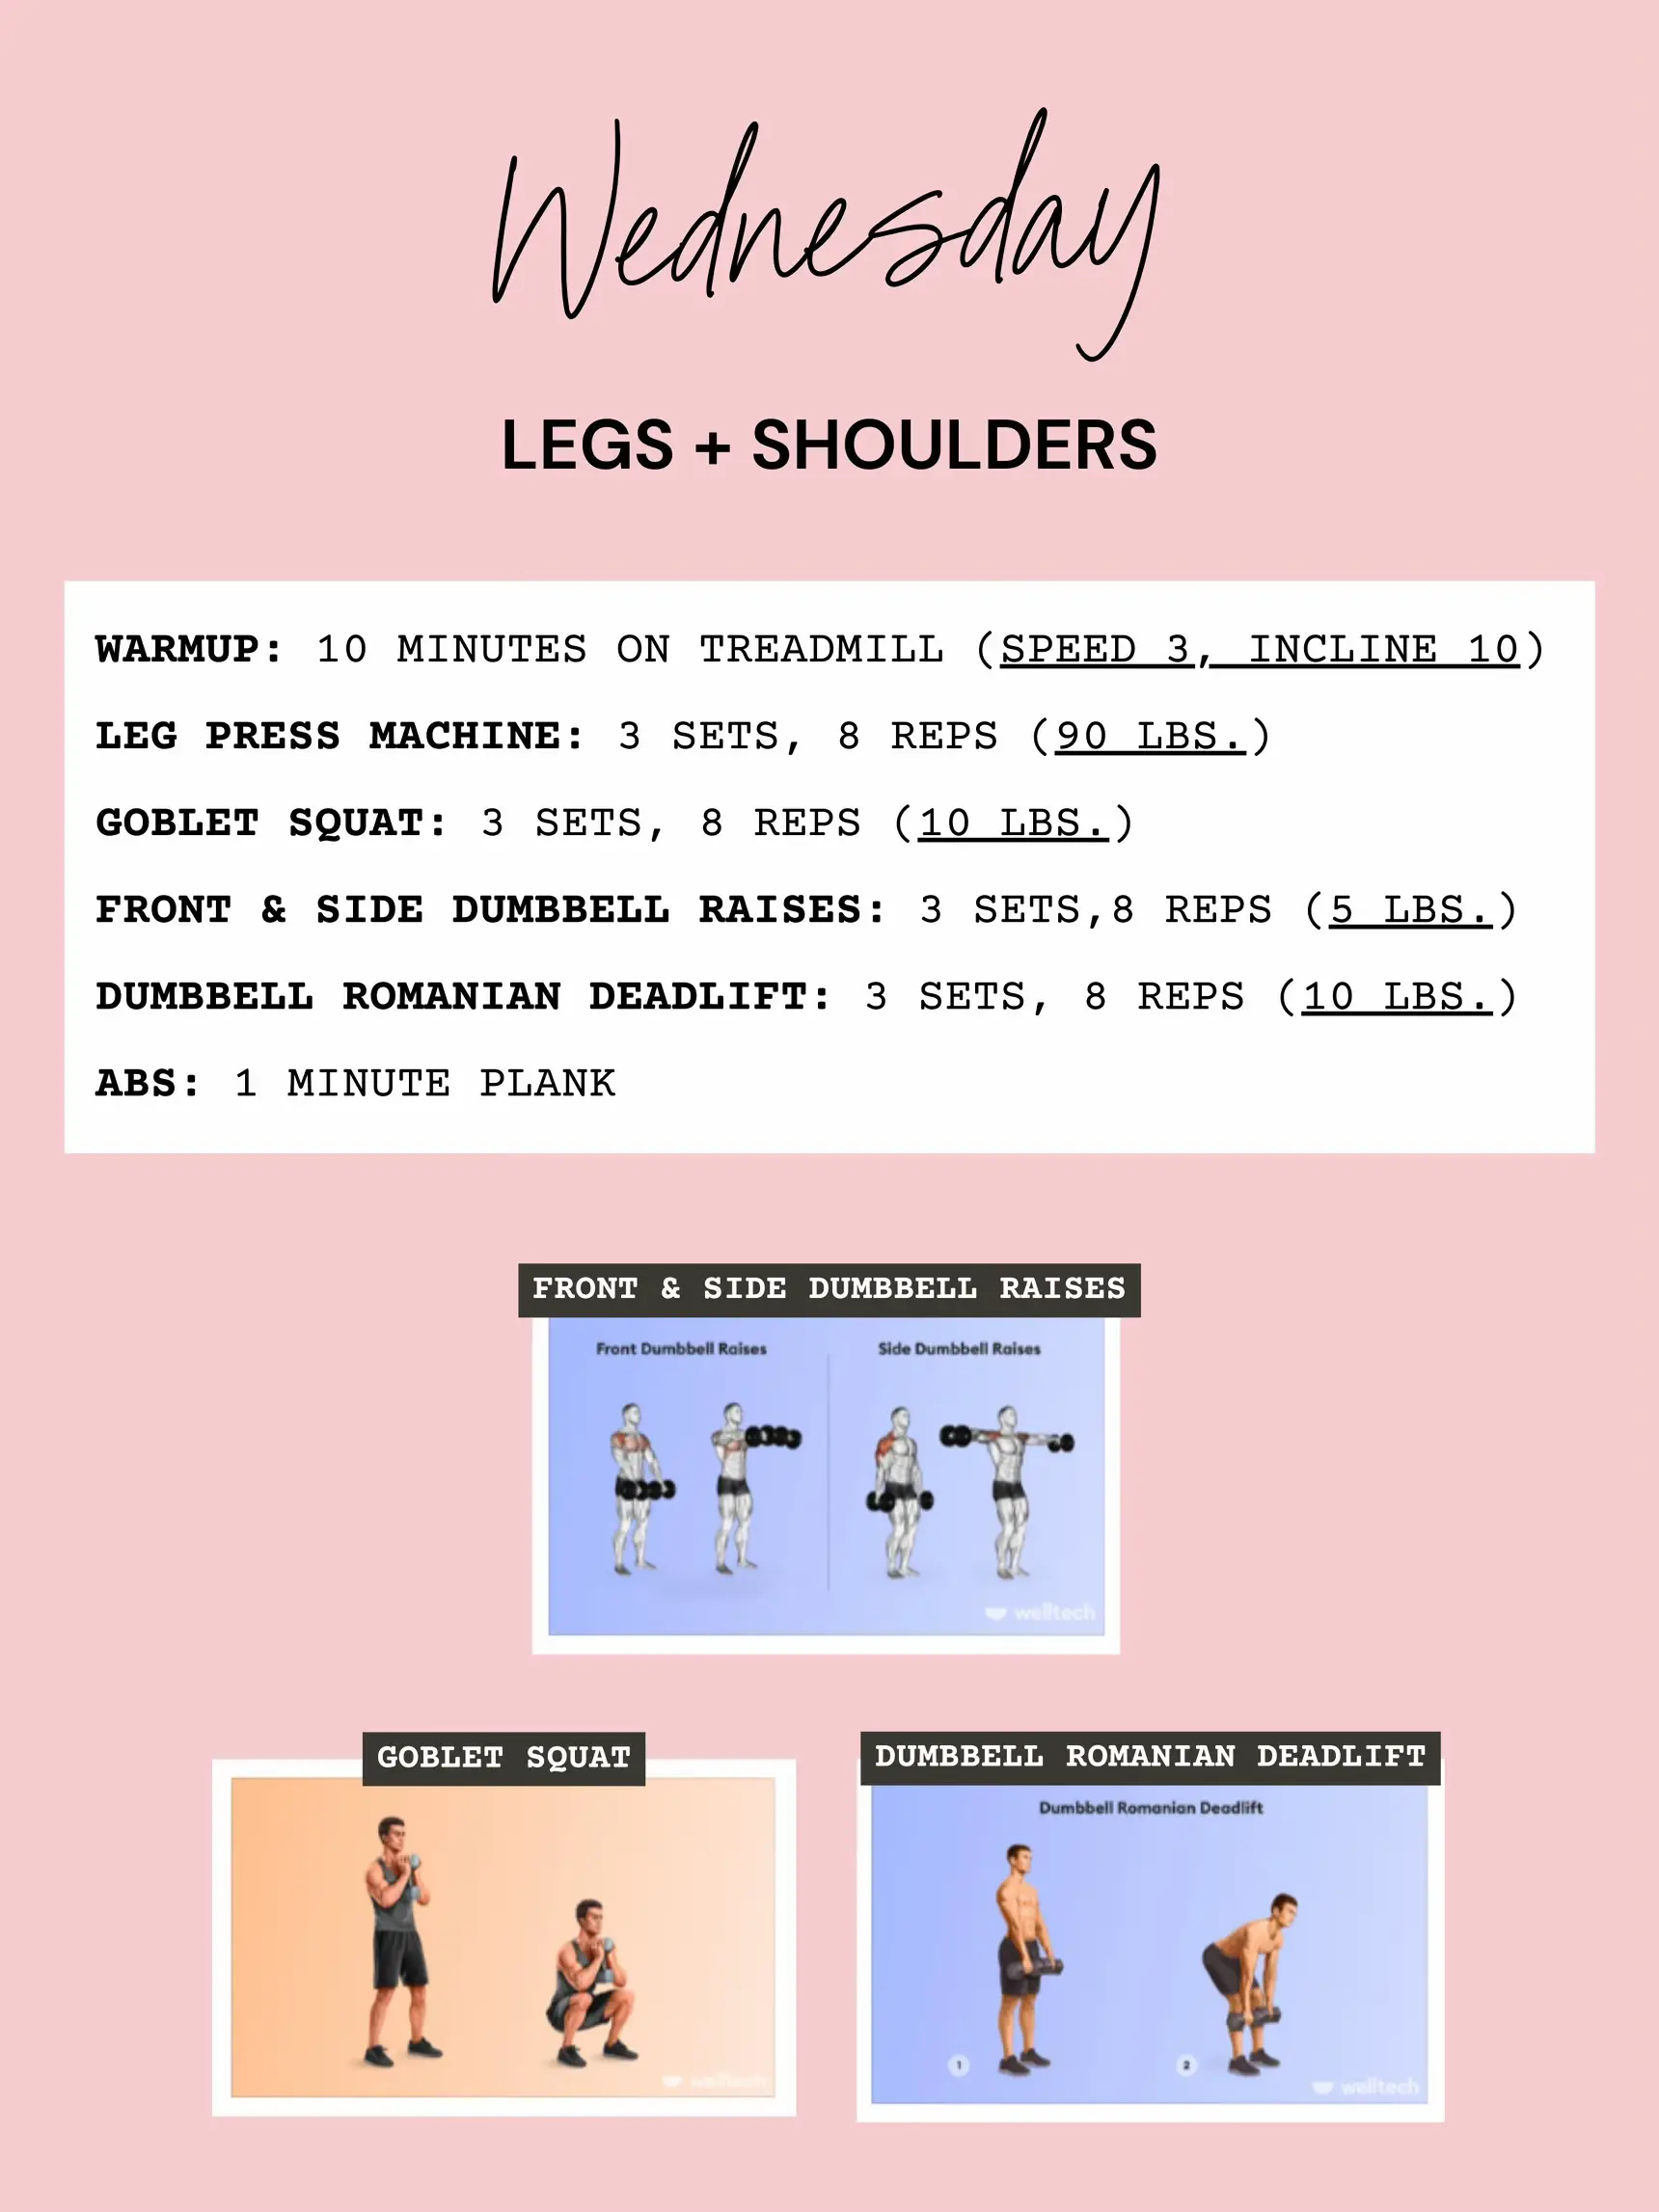 Complete Beginners, How to lose that Flabby Arms in 5 moves #beginnerw, Arms Workout